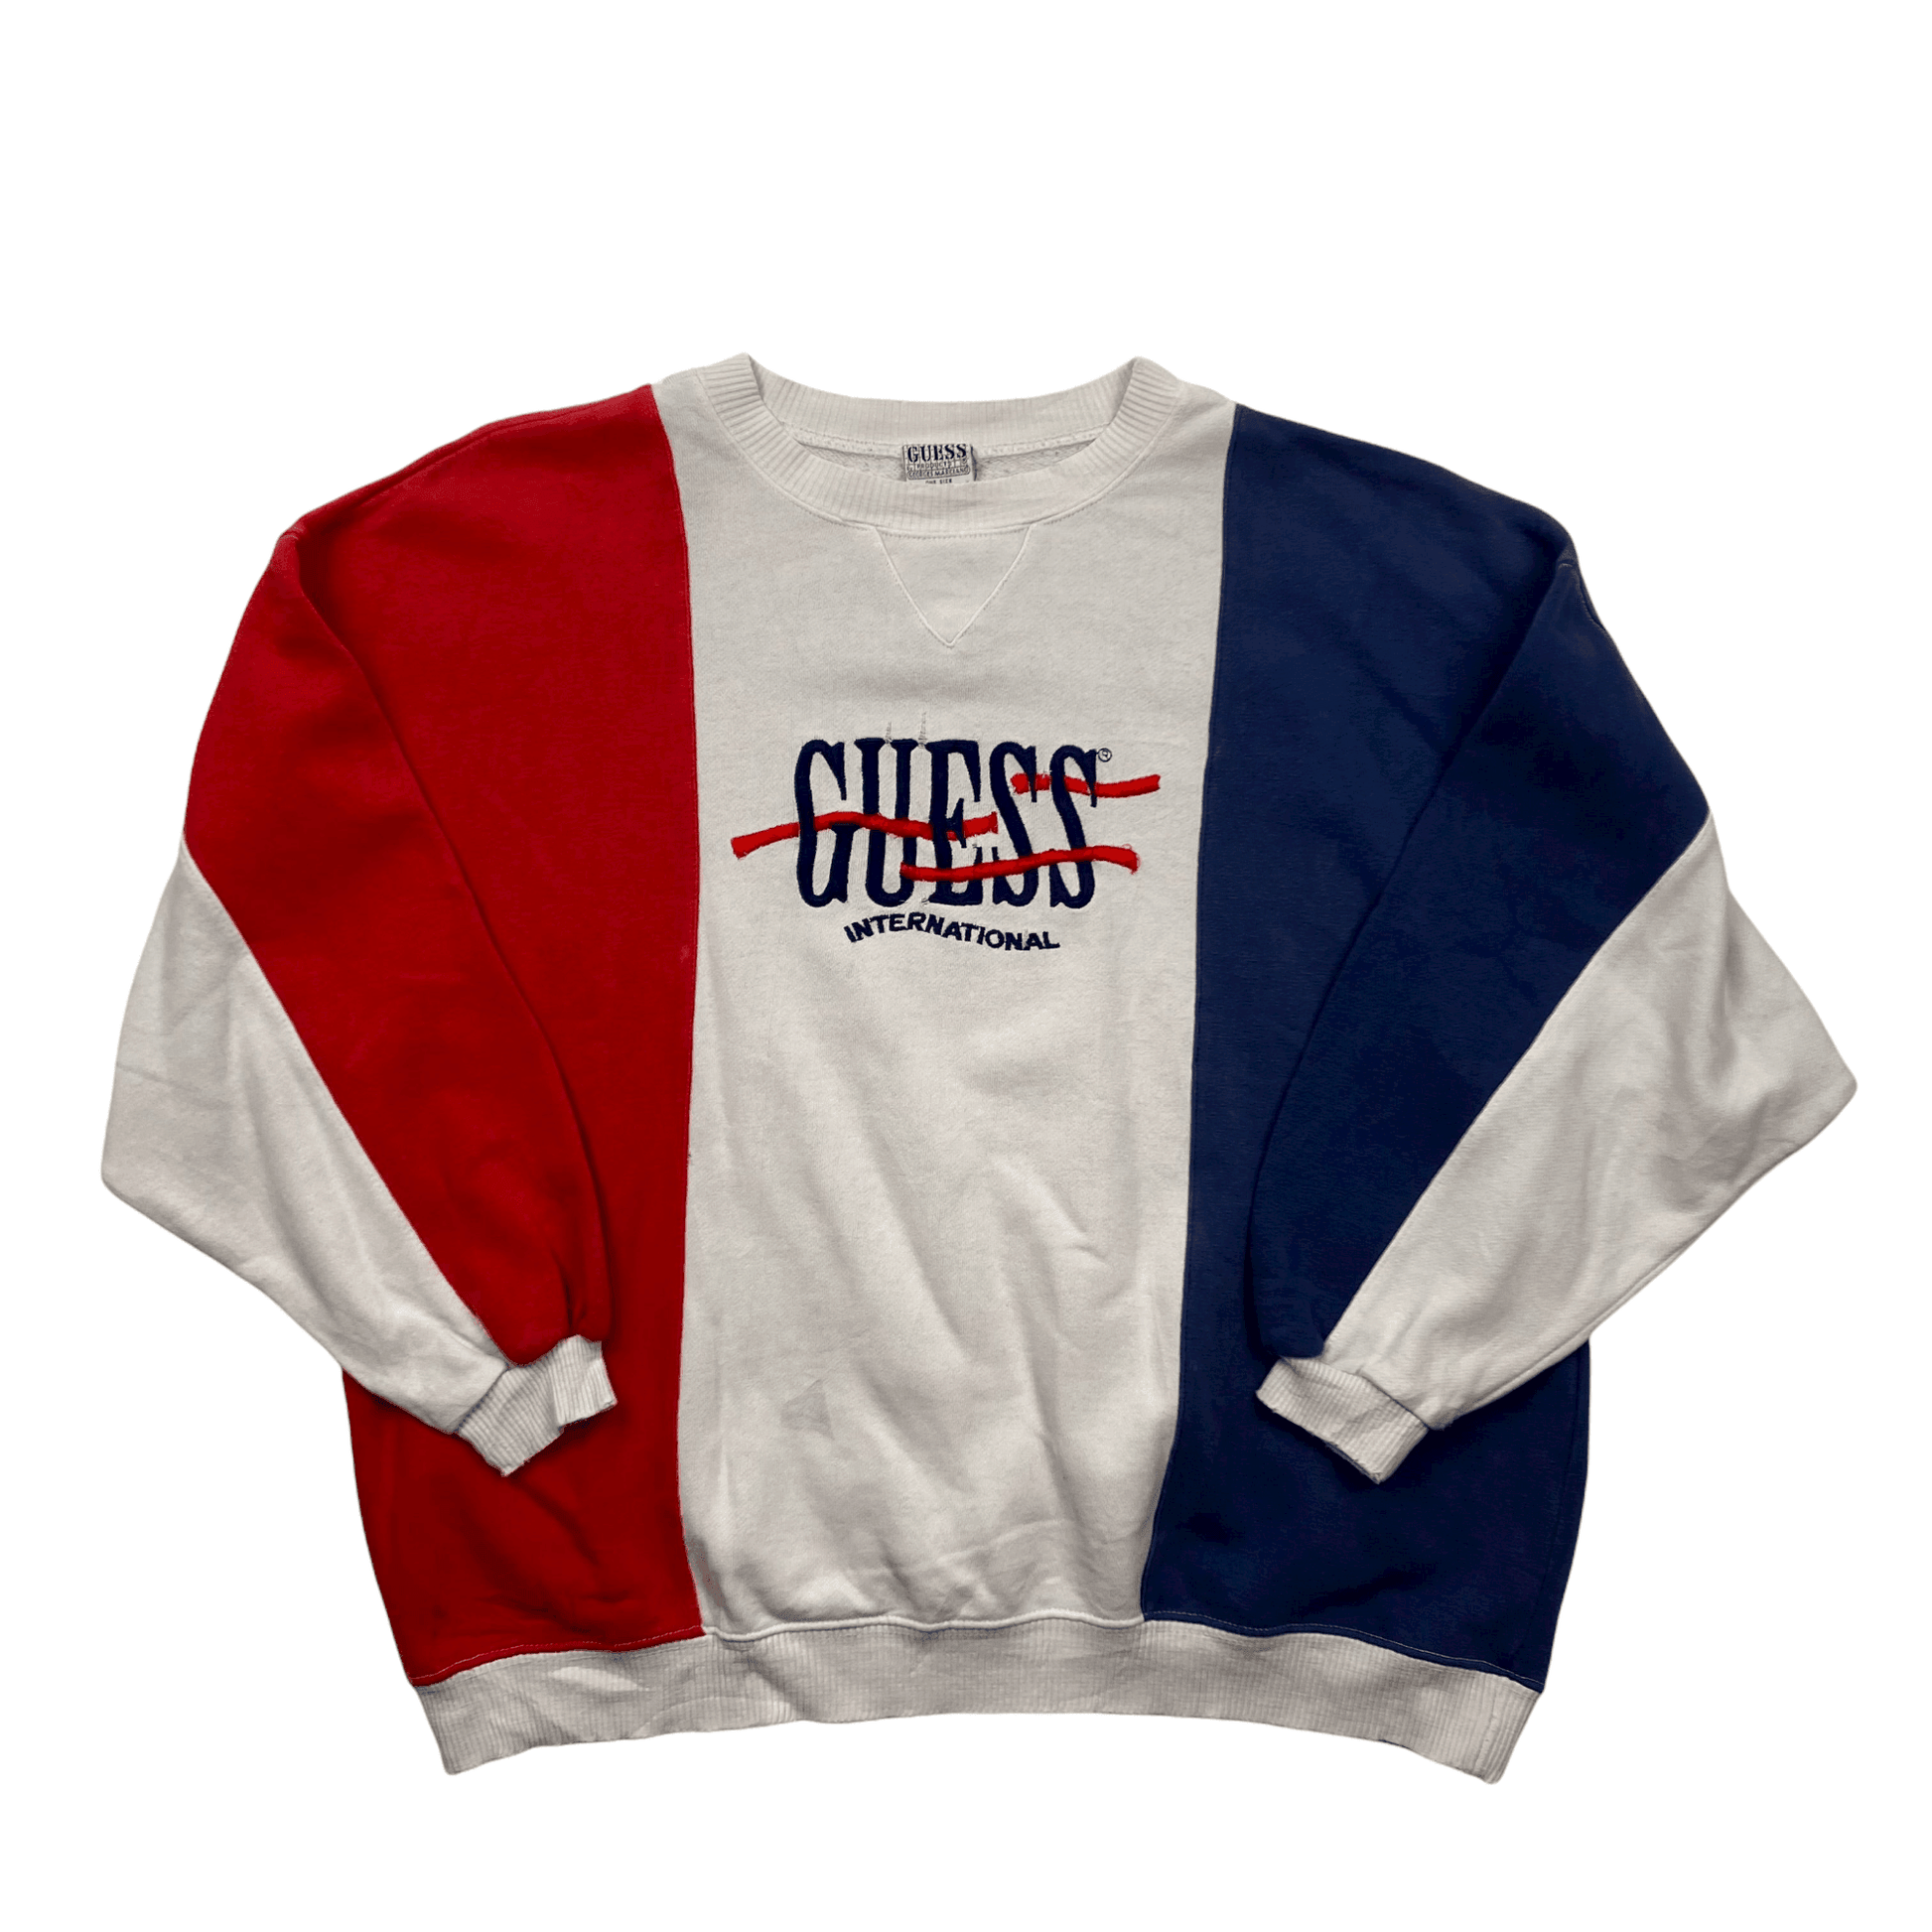 Vintage 90s White, Blue + Red Guess Jeans Spell-Out Sweatshirt - Medium - The Streetwear Studio